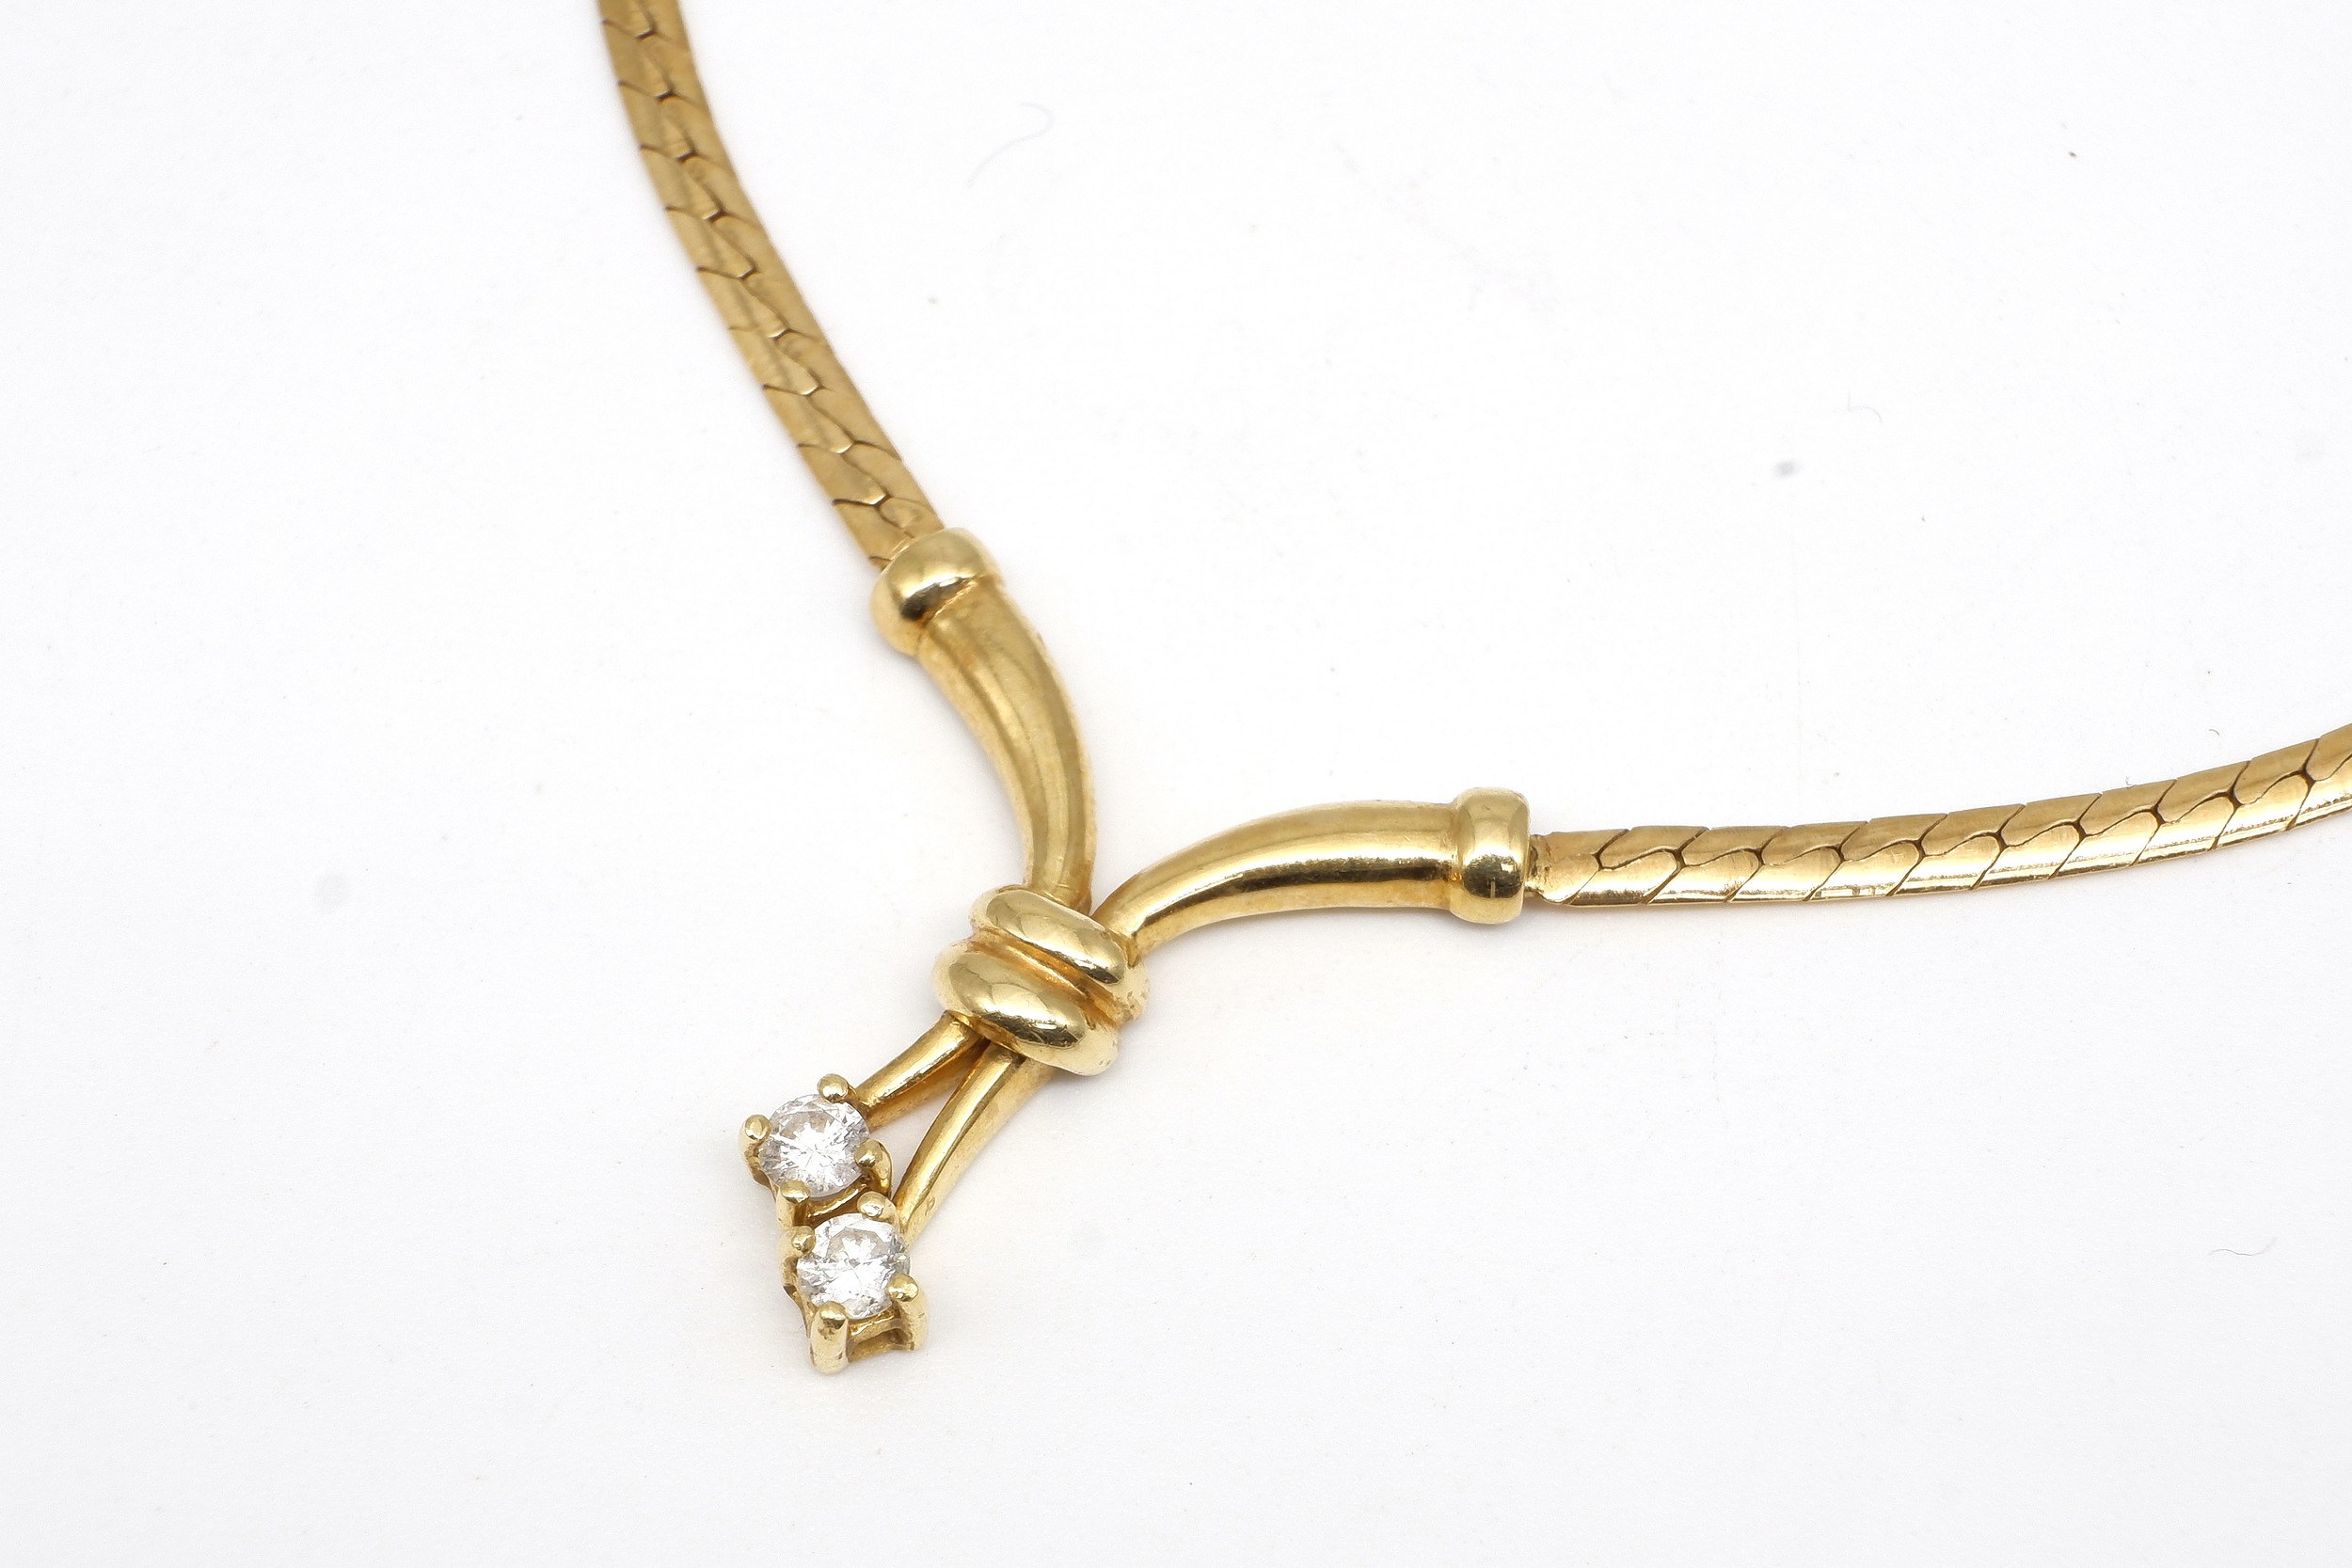 '18ct Yellow Gold Necklet Snake Chain with Centre Drop with Two Round Brilliant Cut Diamonds'